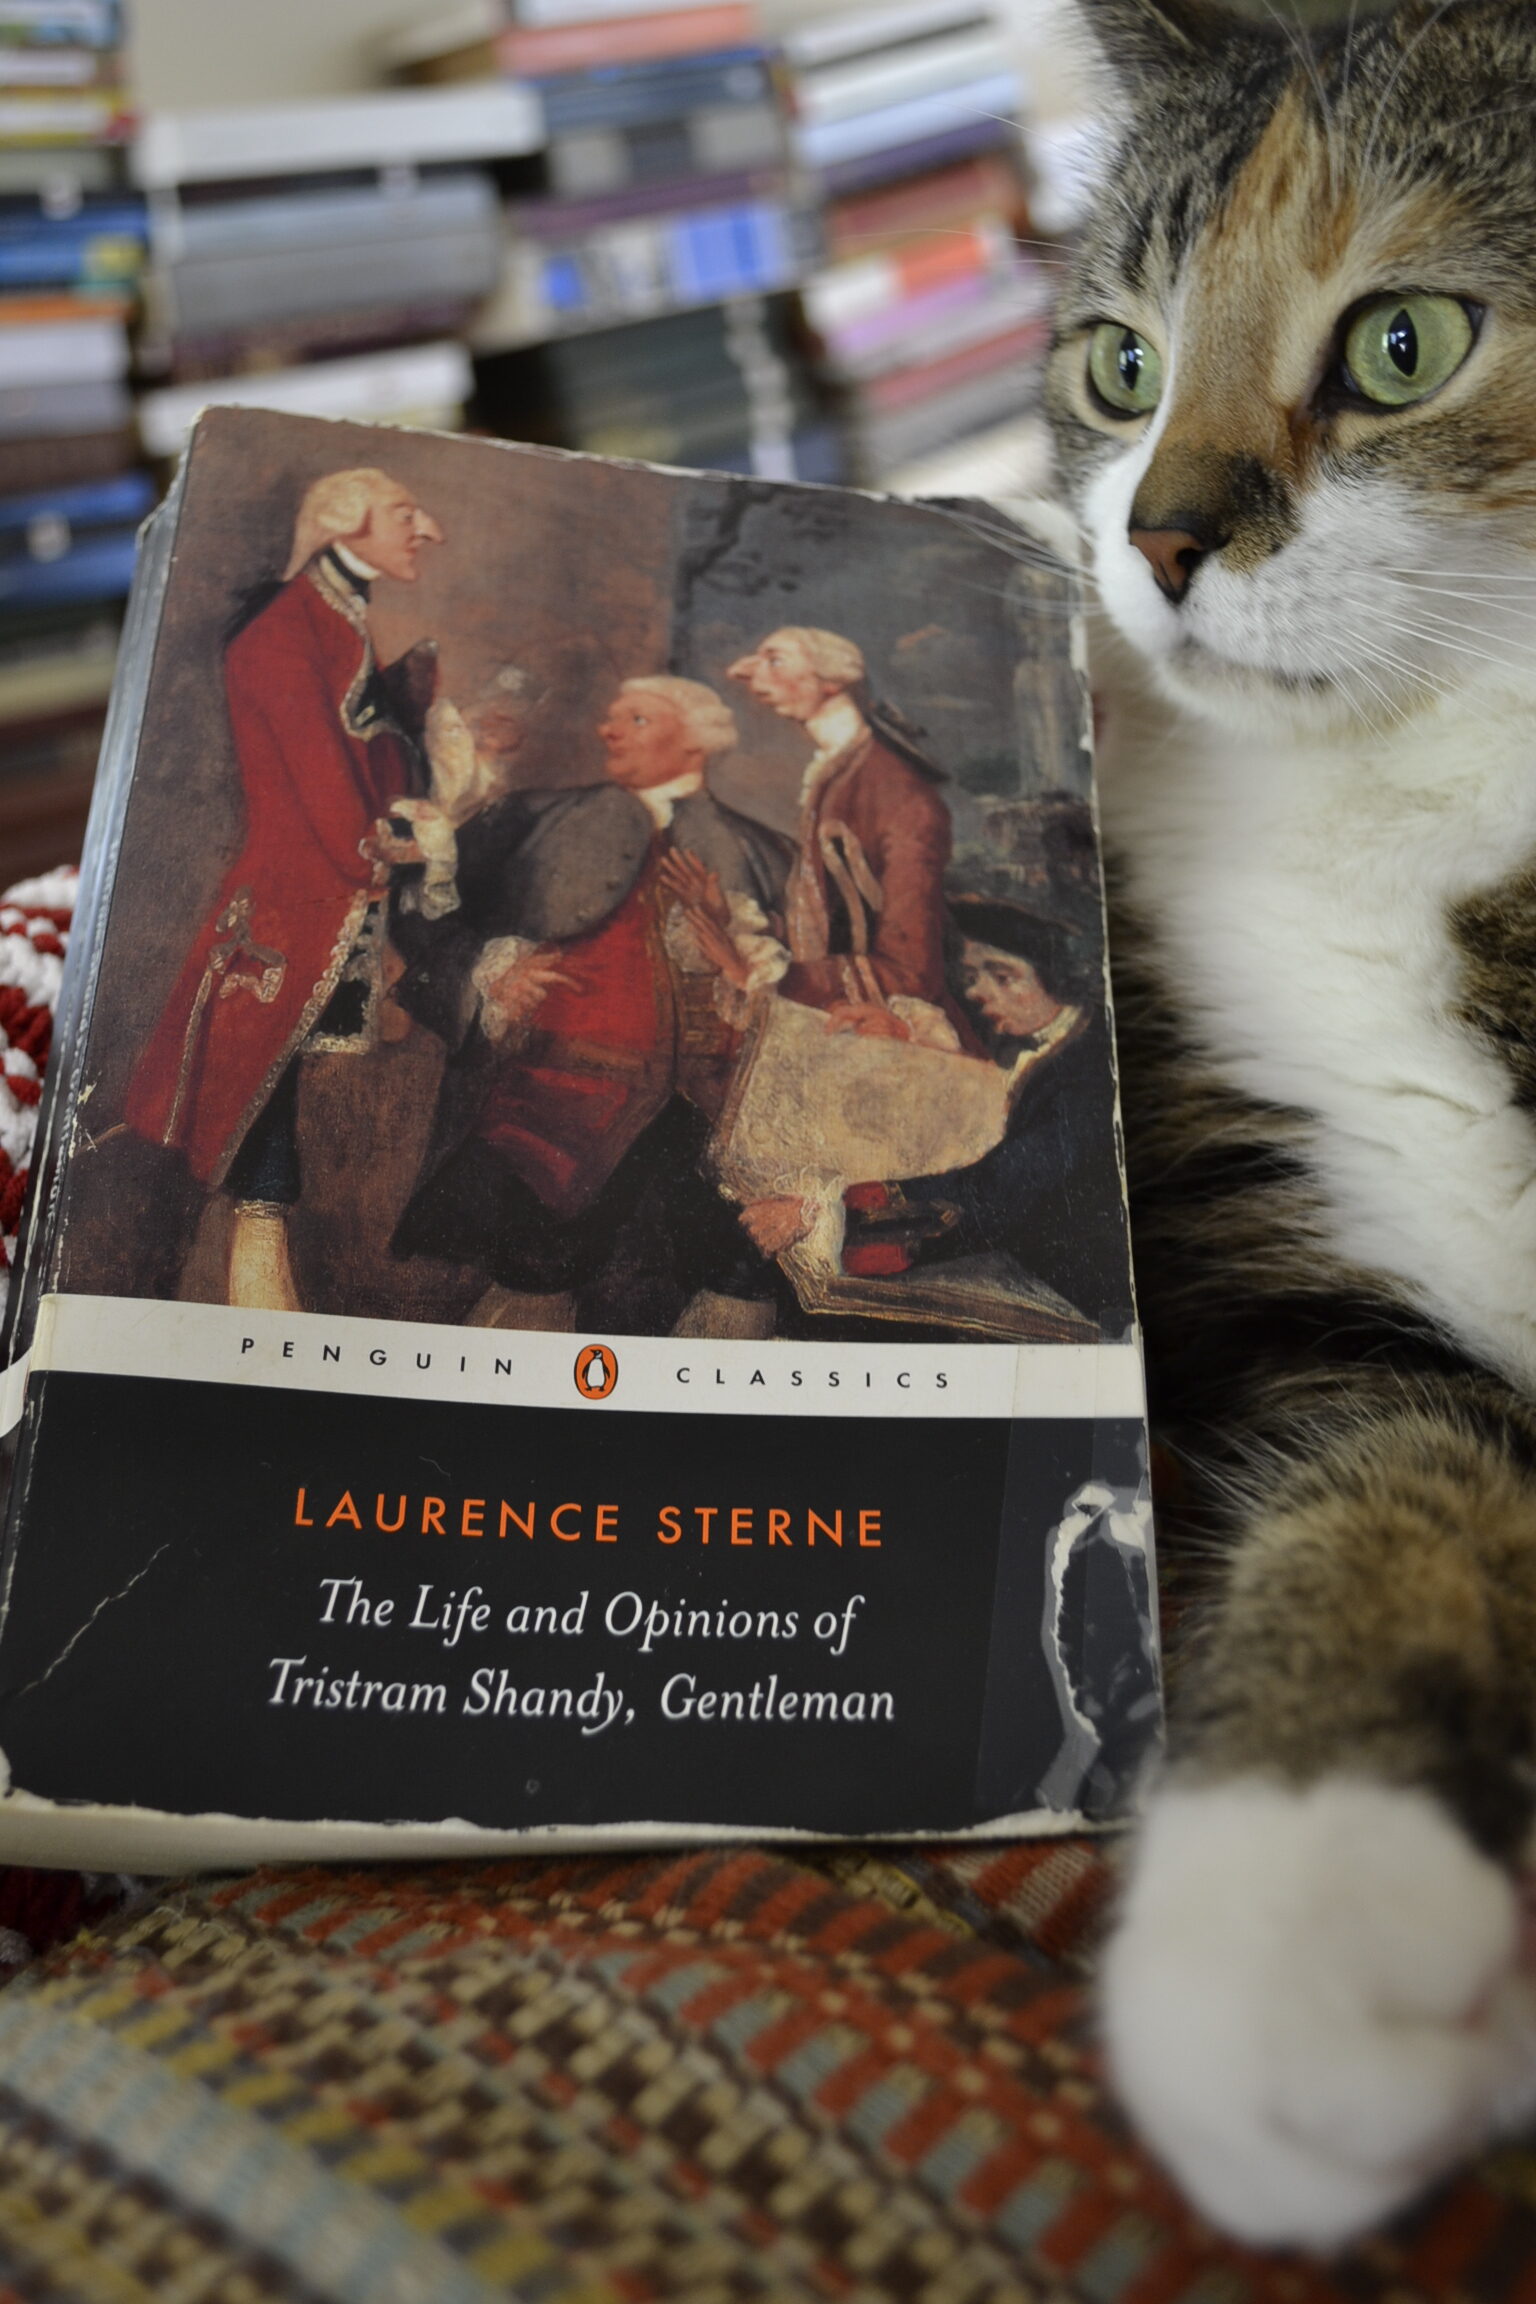 A calico tabby sits beside a copy of Tristram Shandy.